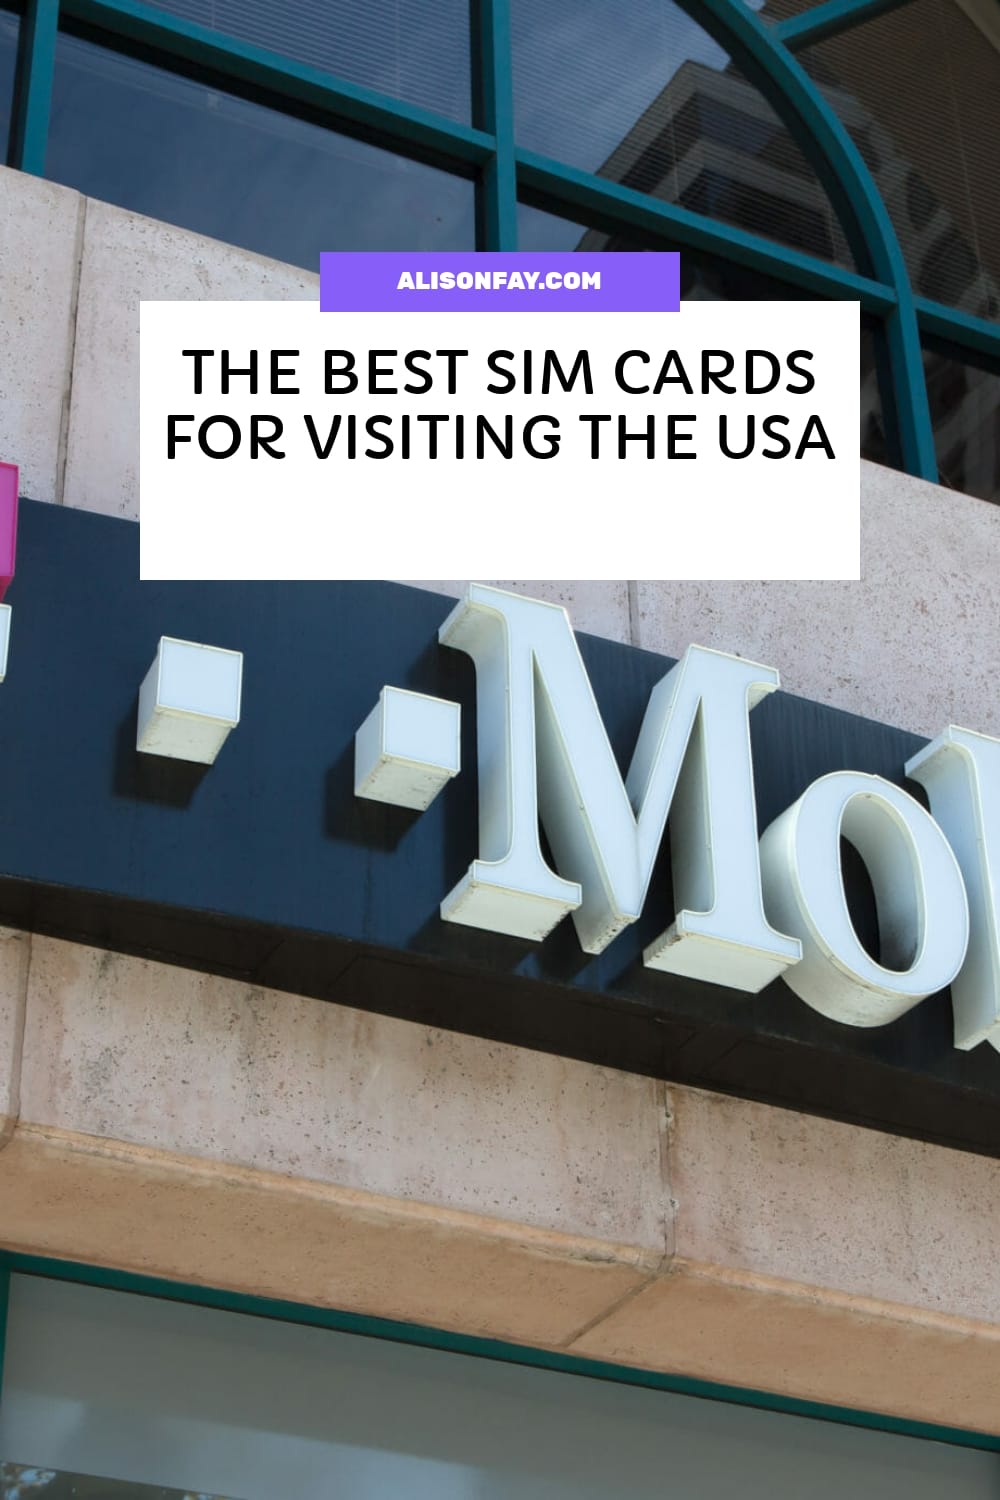 The Best Sim Cards for visiting the USA